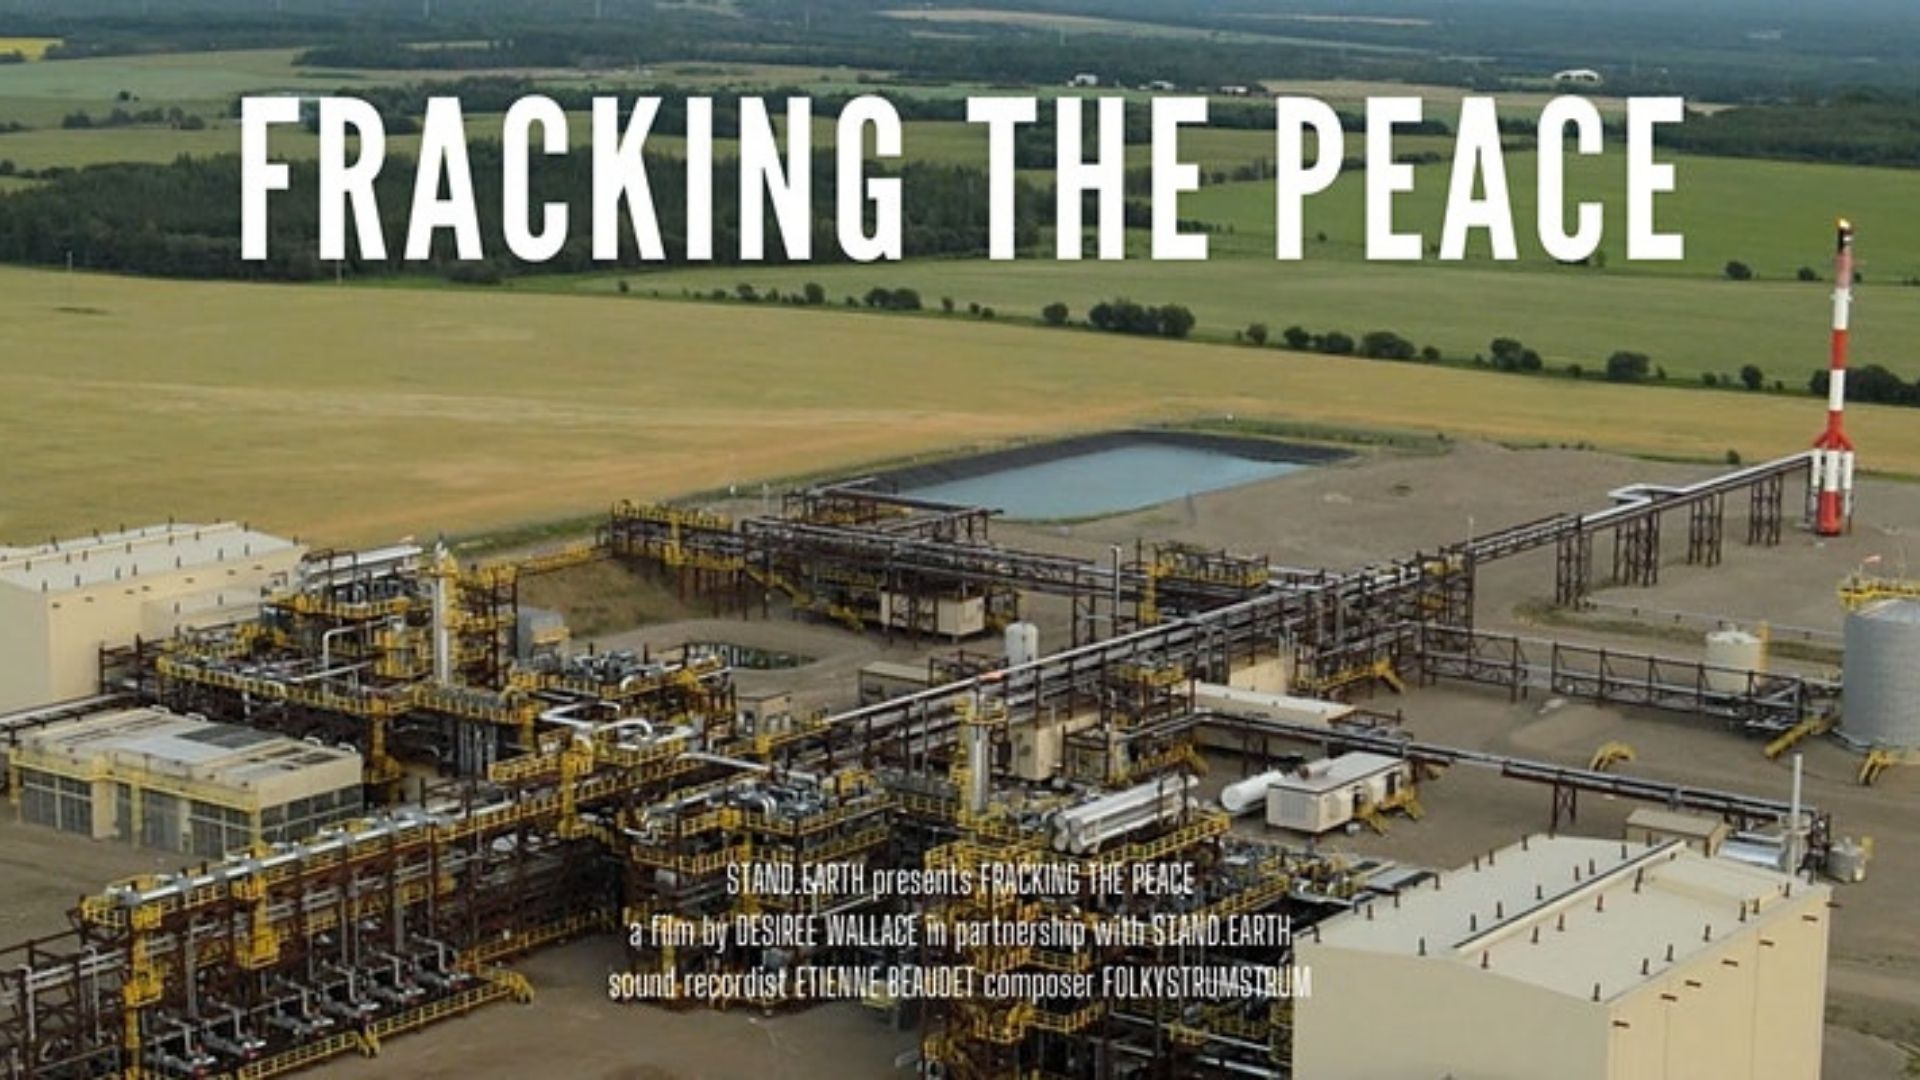 A photo of a fracking plant. Text over the image says "FRACKING THE PEACE. Stand.earth presents Fracking the Peace. A film by Desiree Wallace in partnership with Stand.earth. Sound recordist Etienne Beaudet. Composer Folkystrumstrum." End of image description.